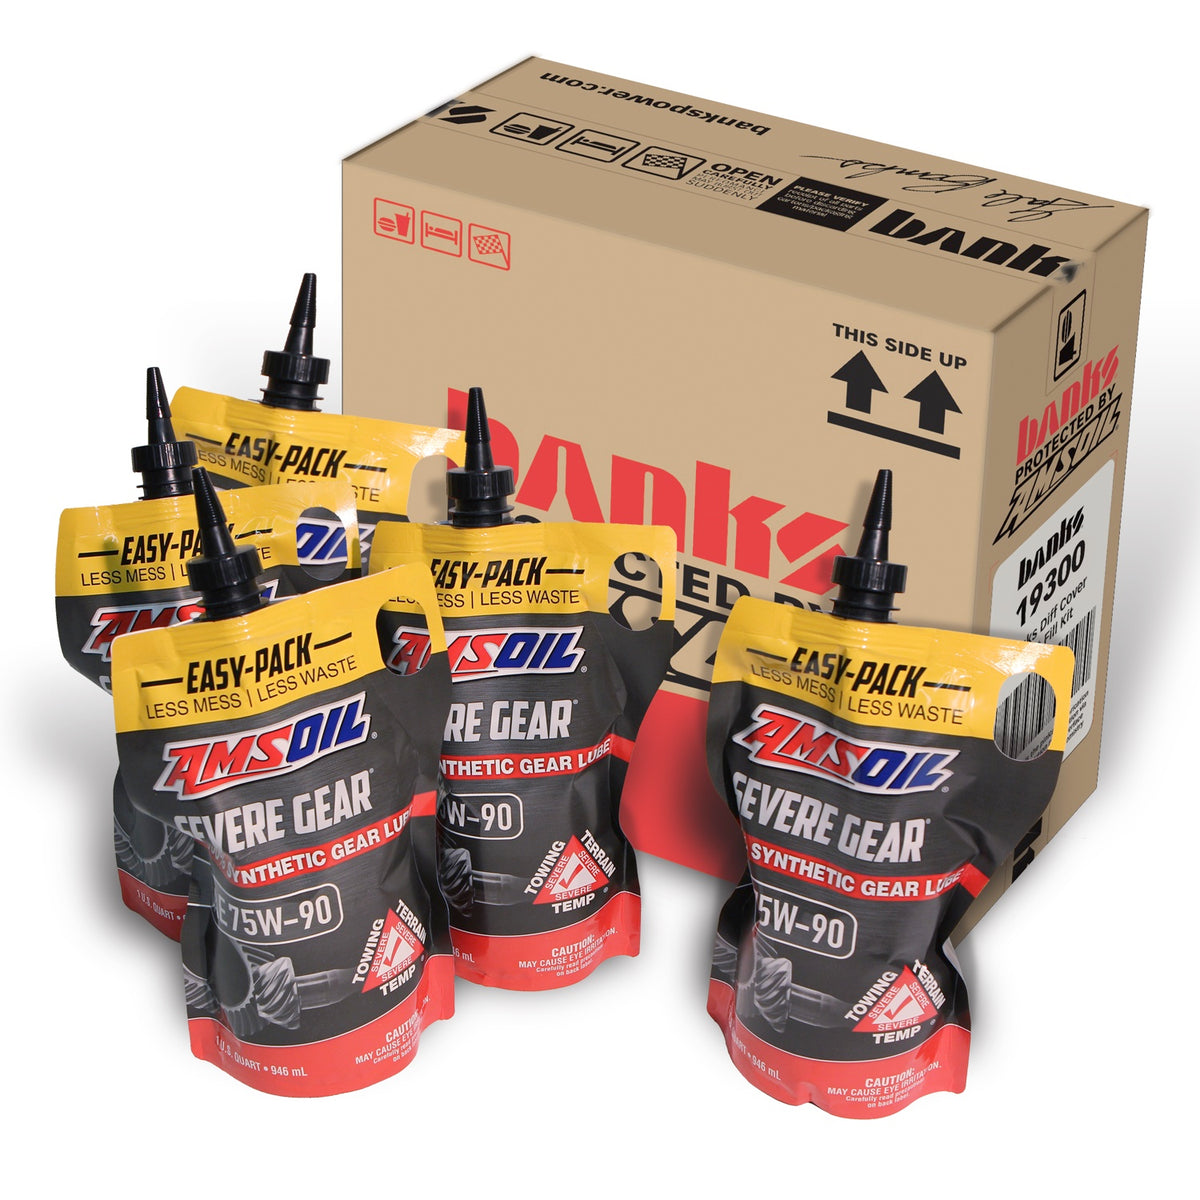 More AMSOIL Products Available in the Award-Winning Easy-Pack